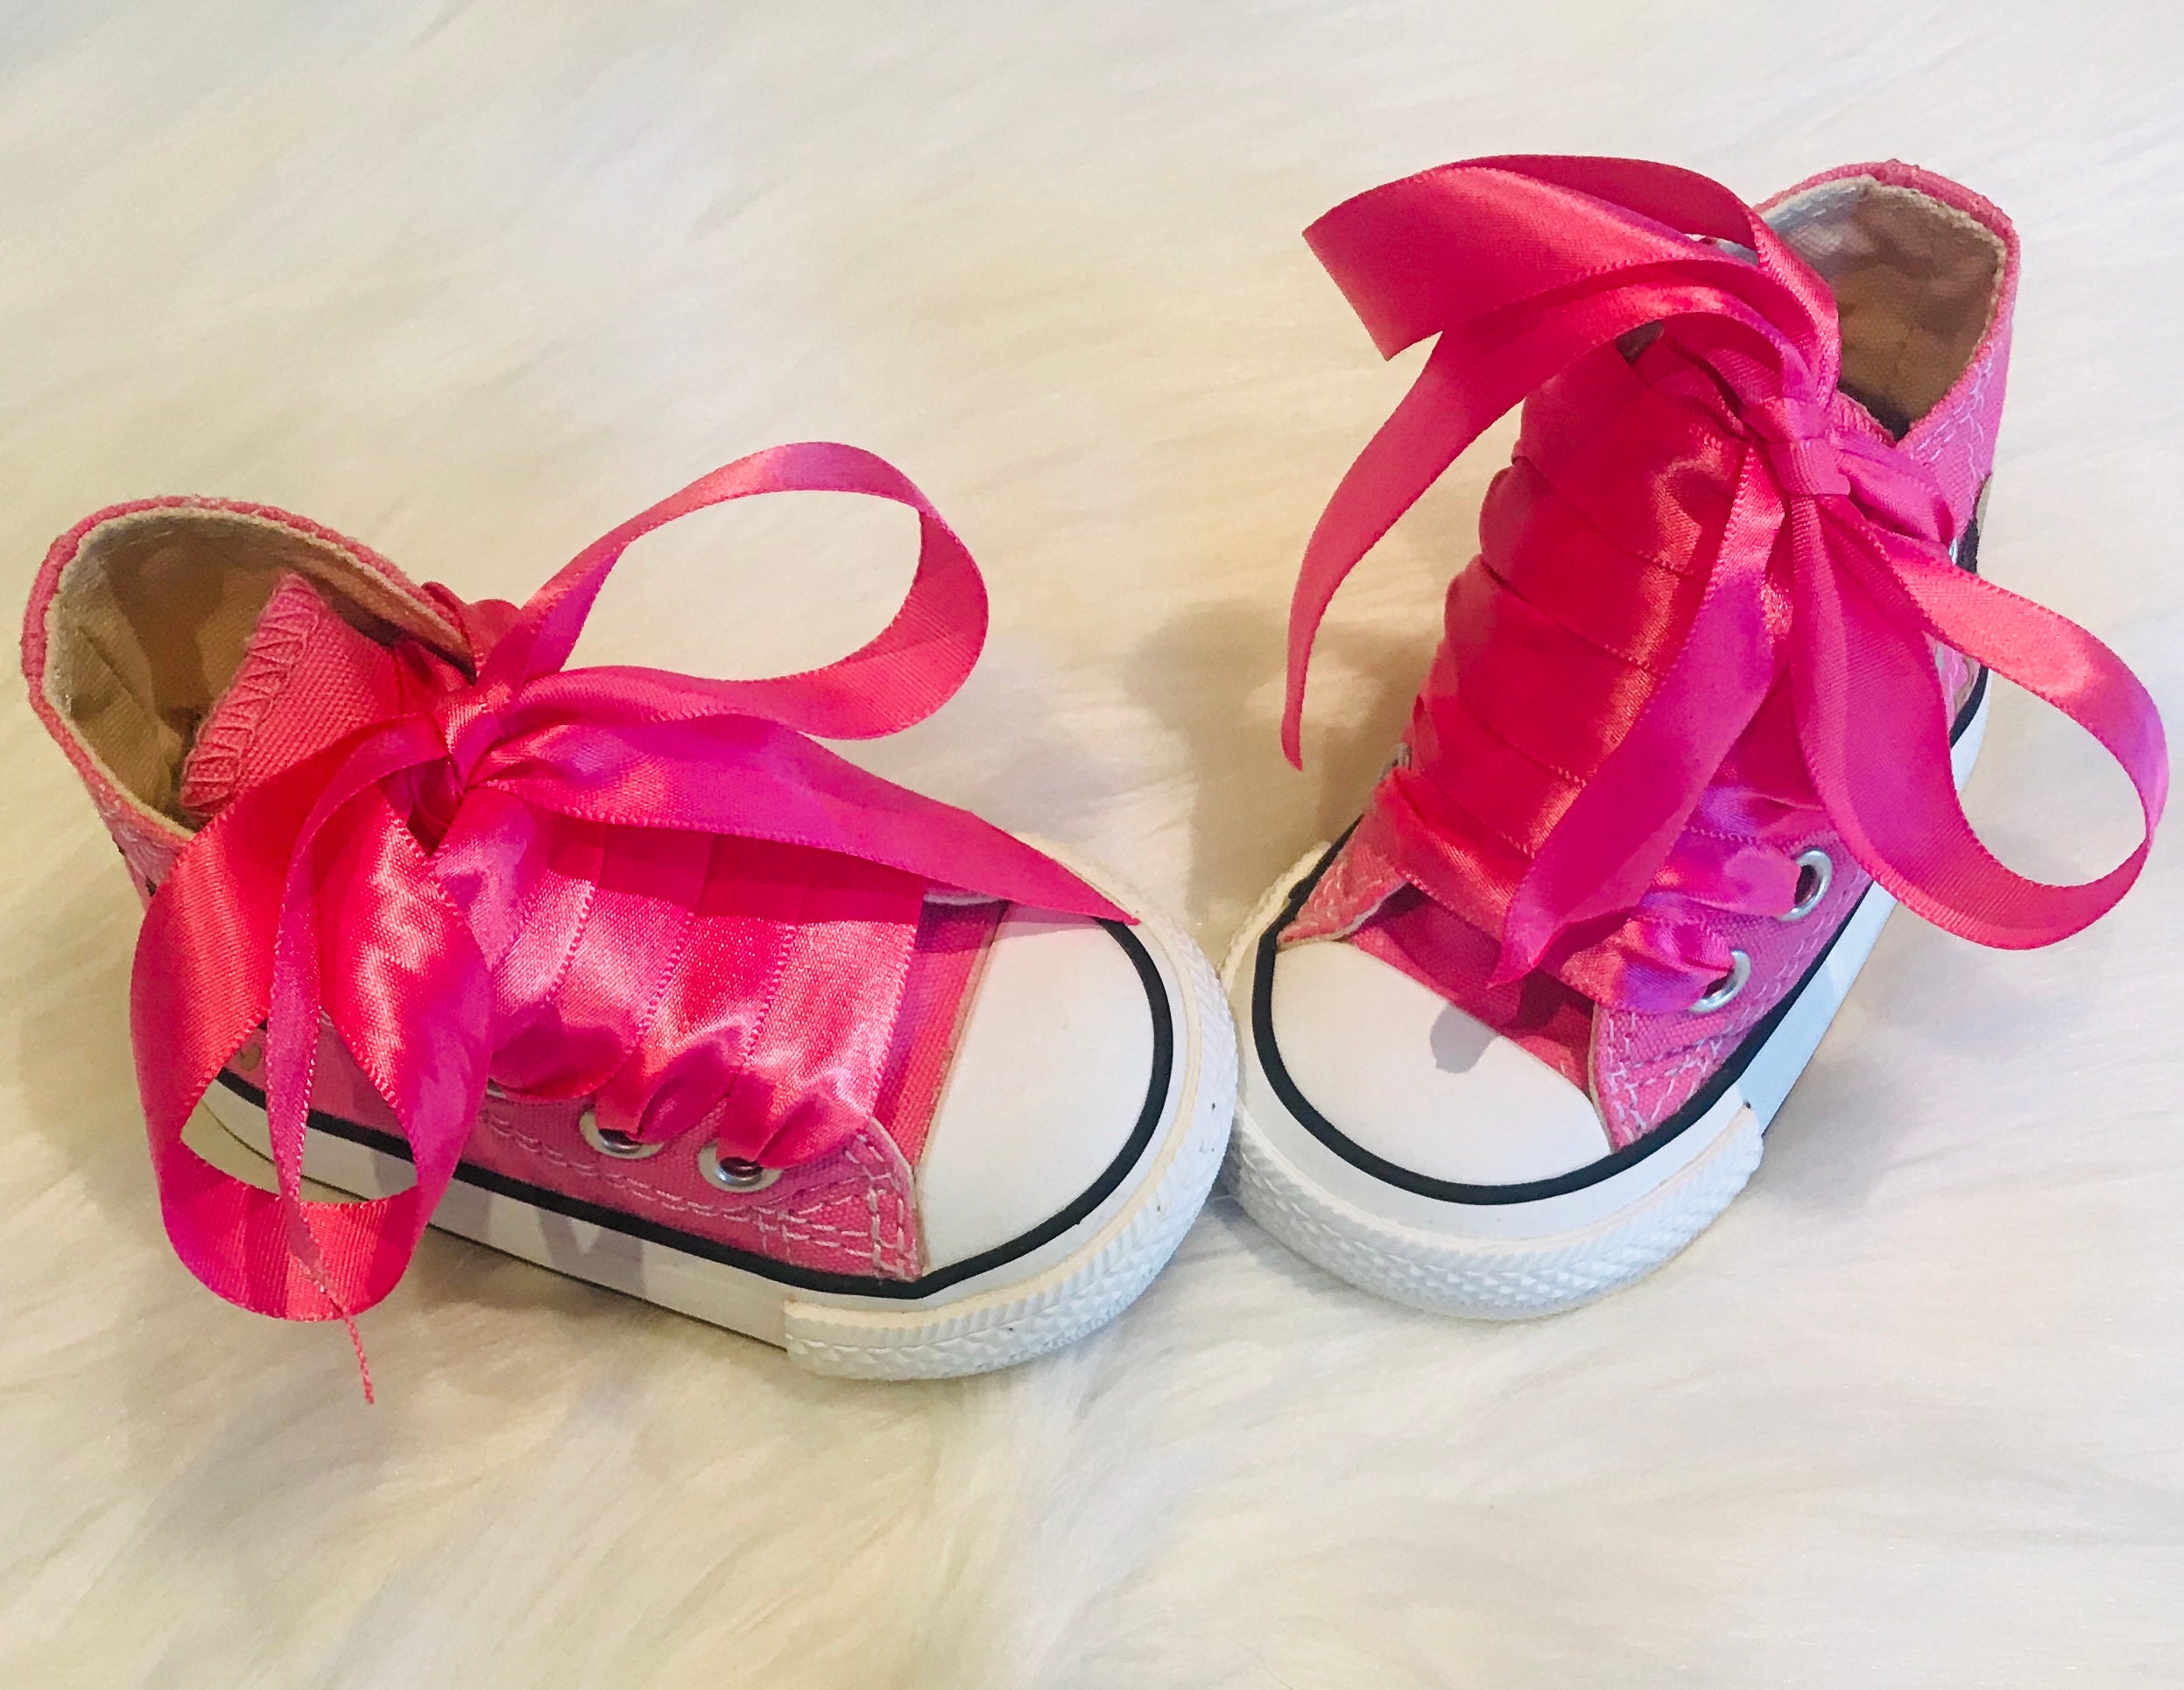 Pink Minnie Mouse Disney Inspired Crystalized High-top | Etsy